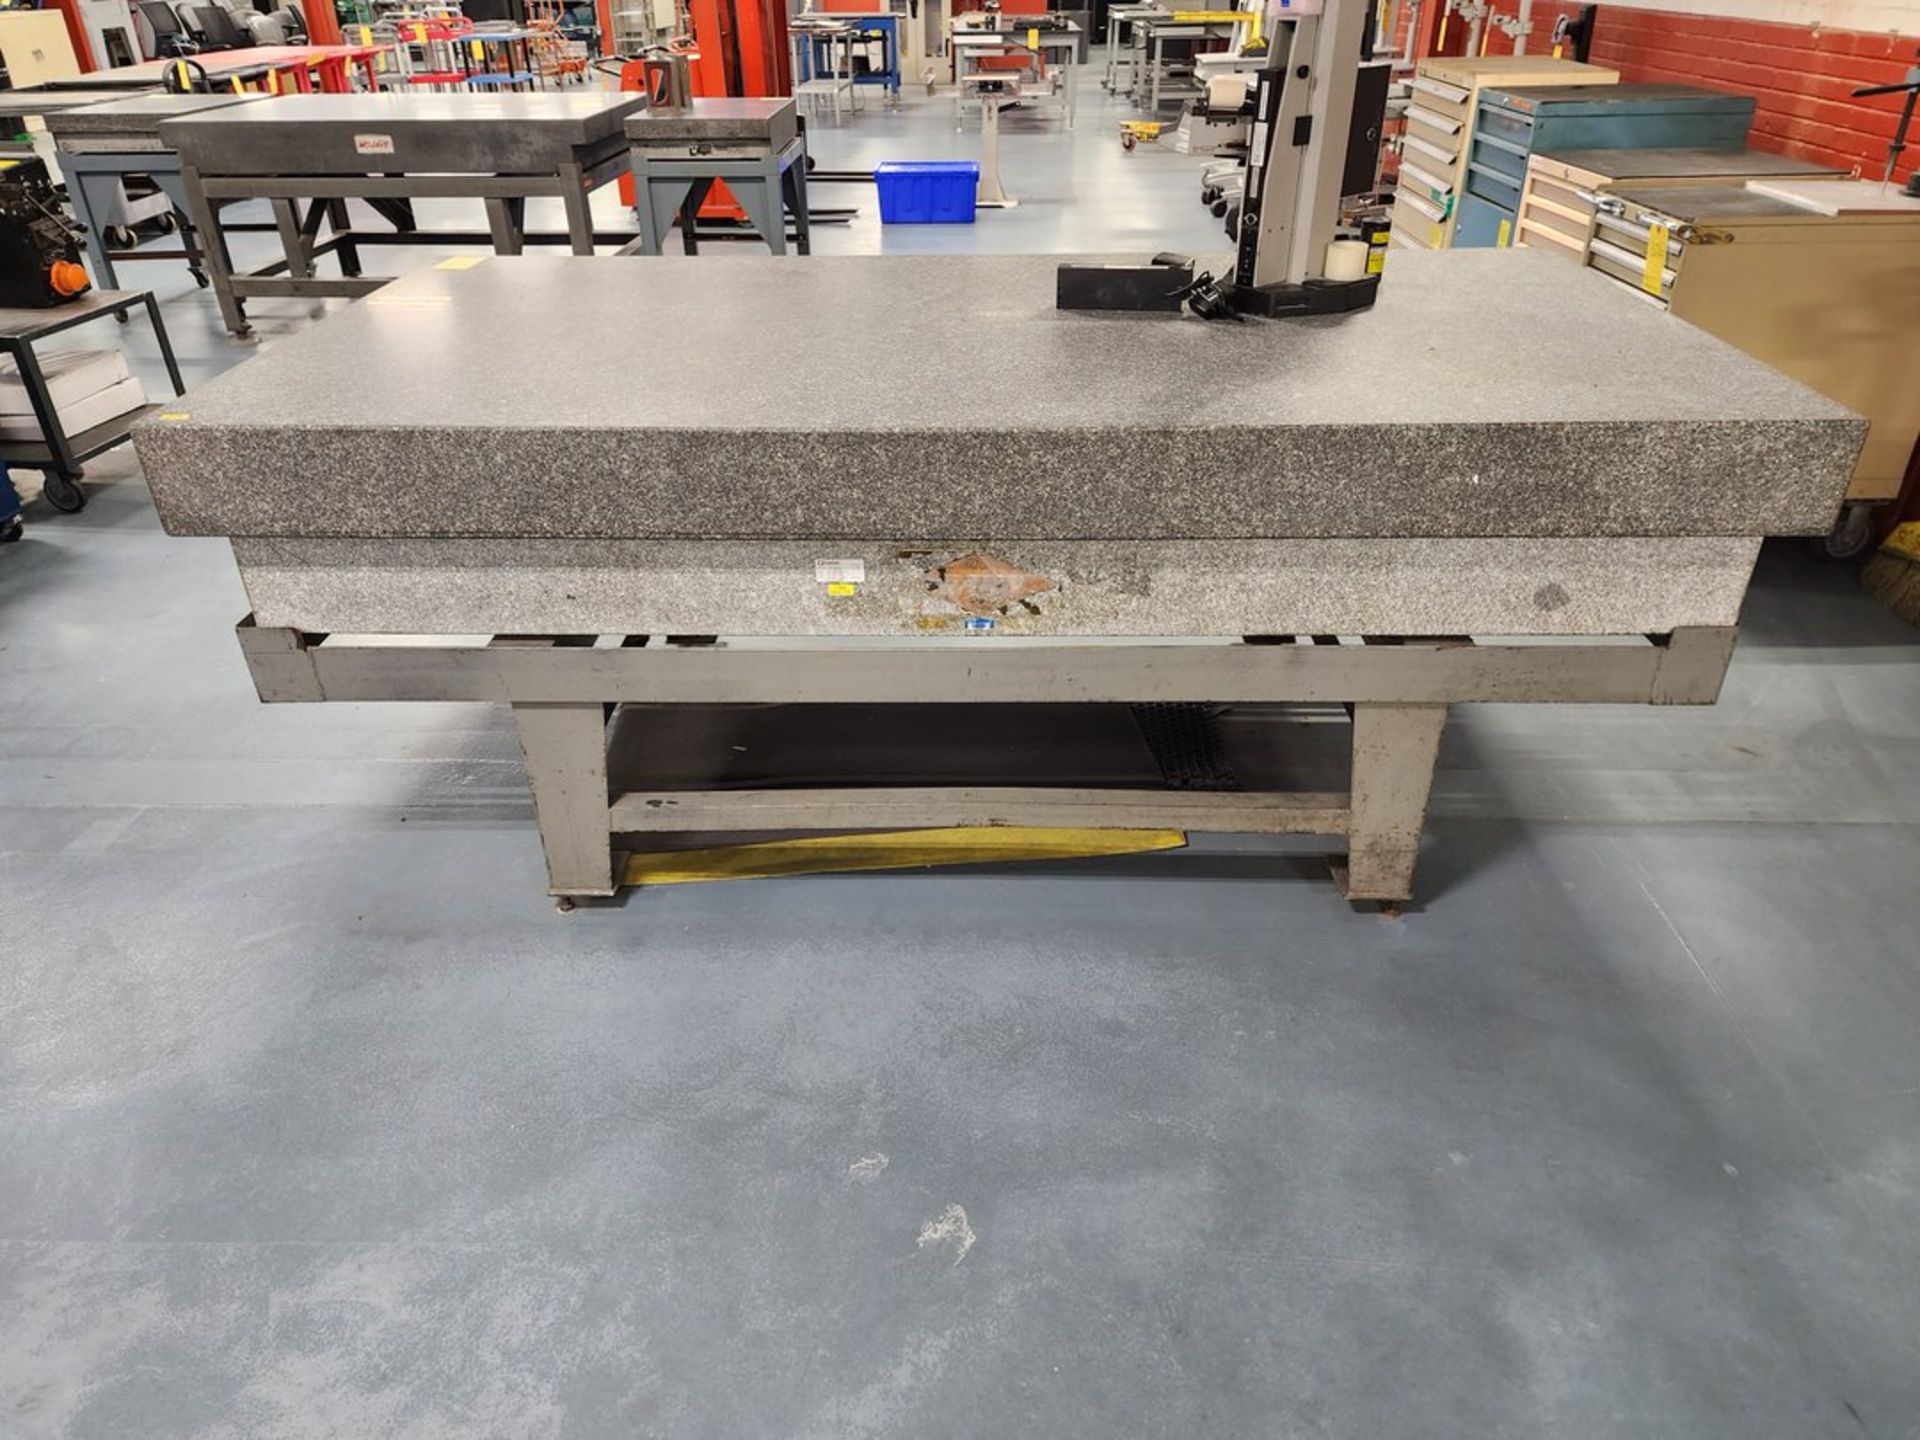 Surface Granite Plate W/ Stand 96"x48" - Image 3 of 4